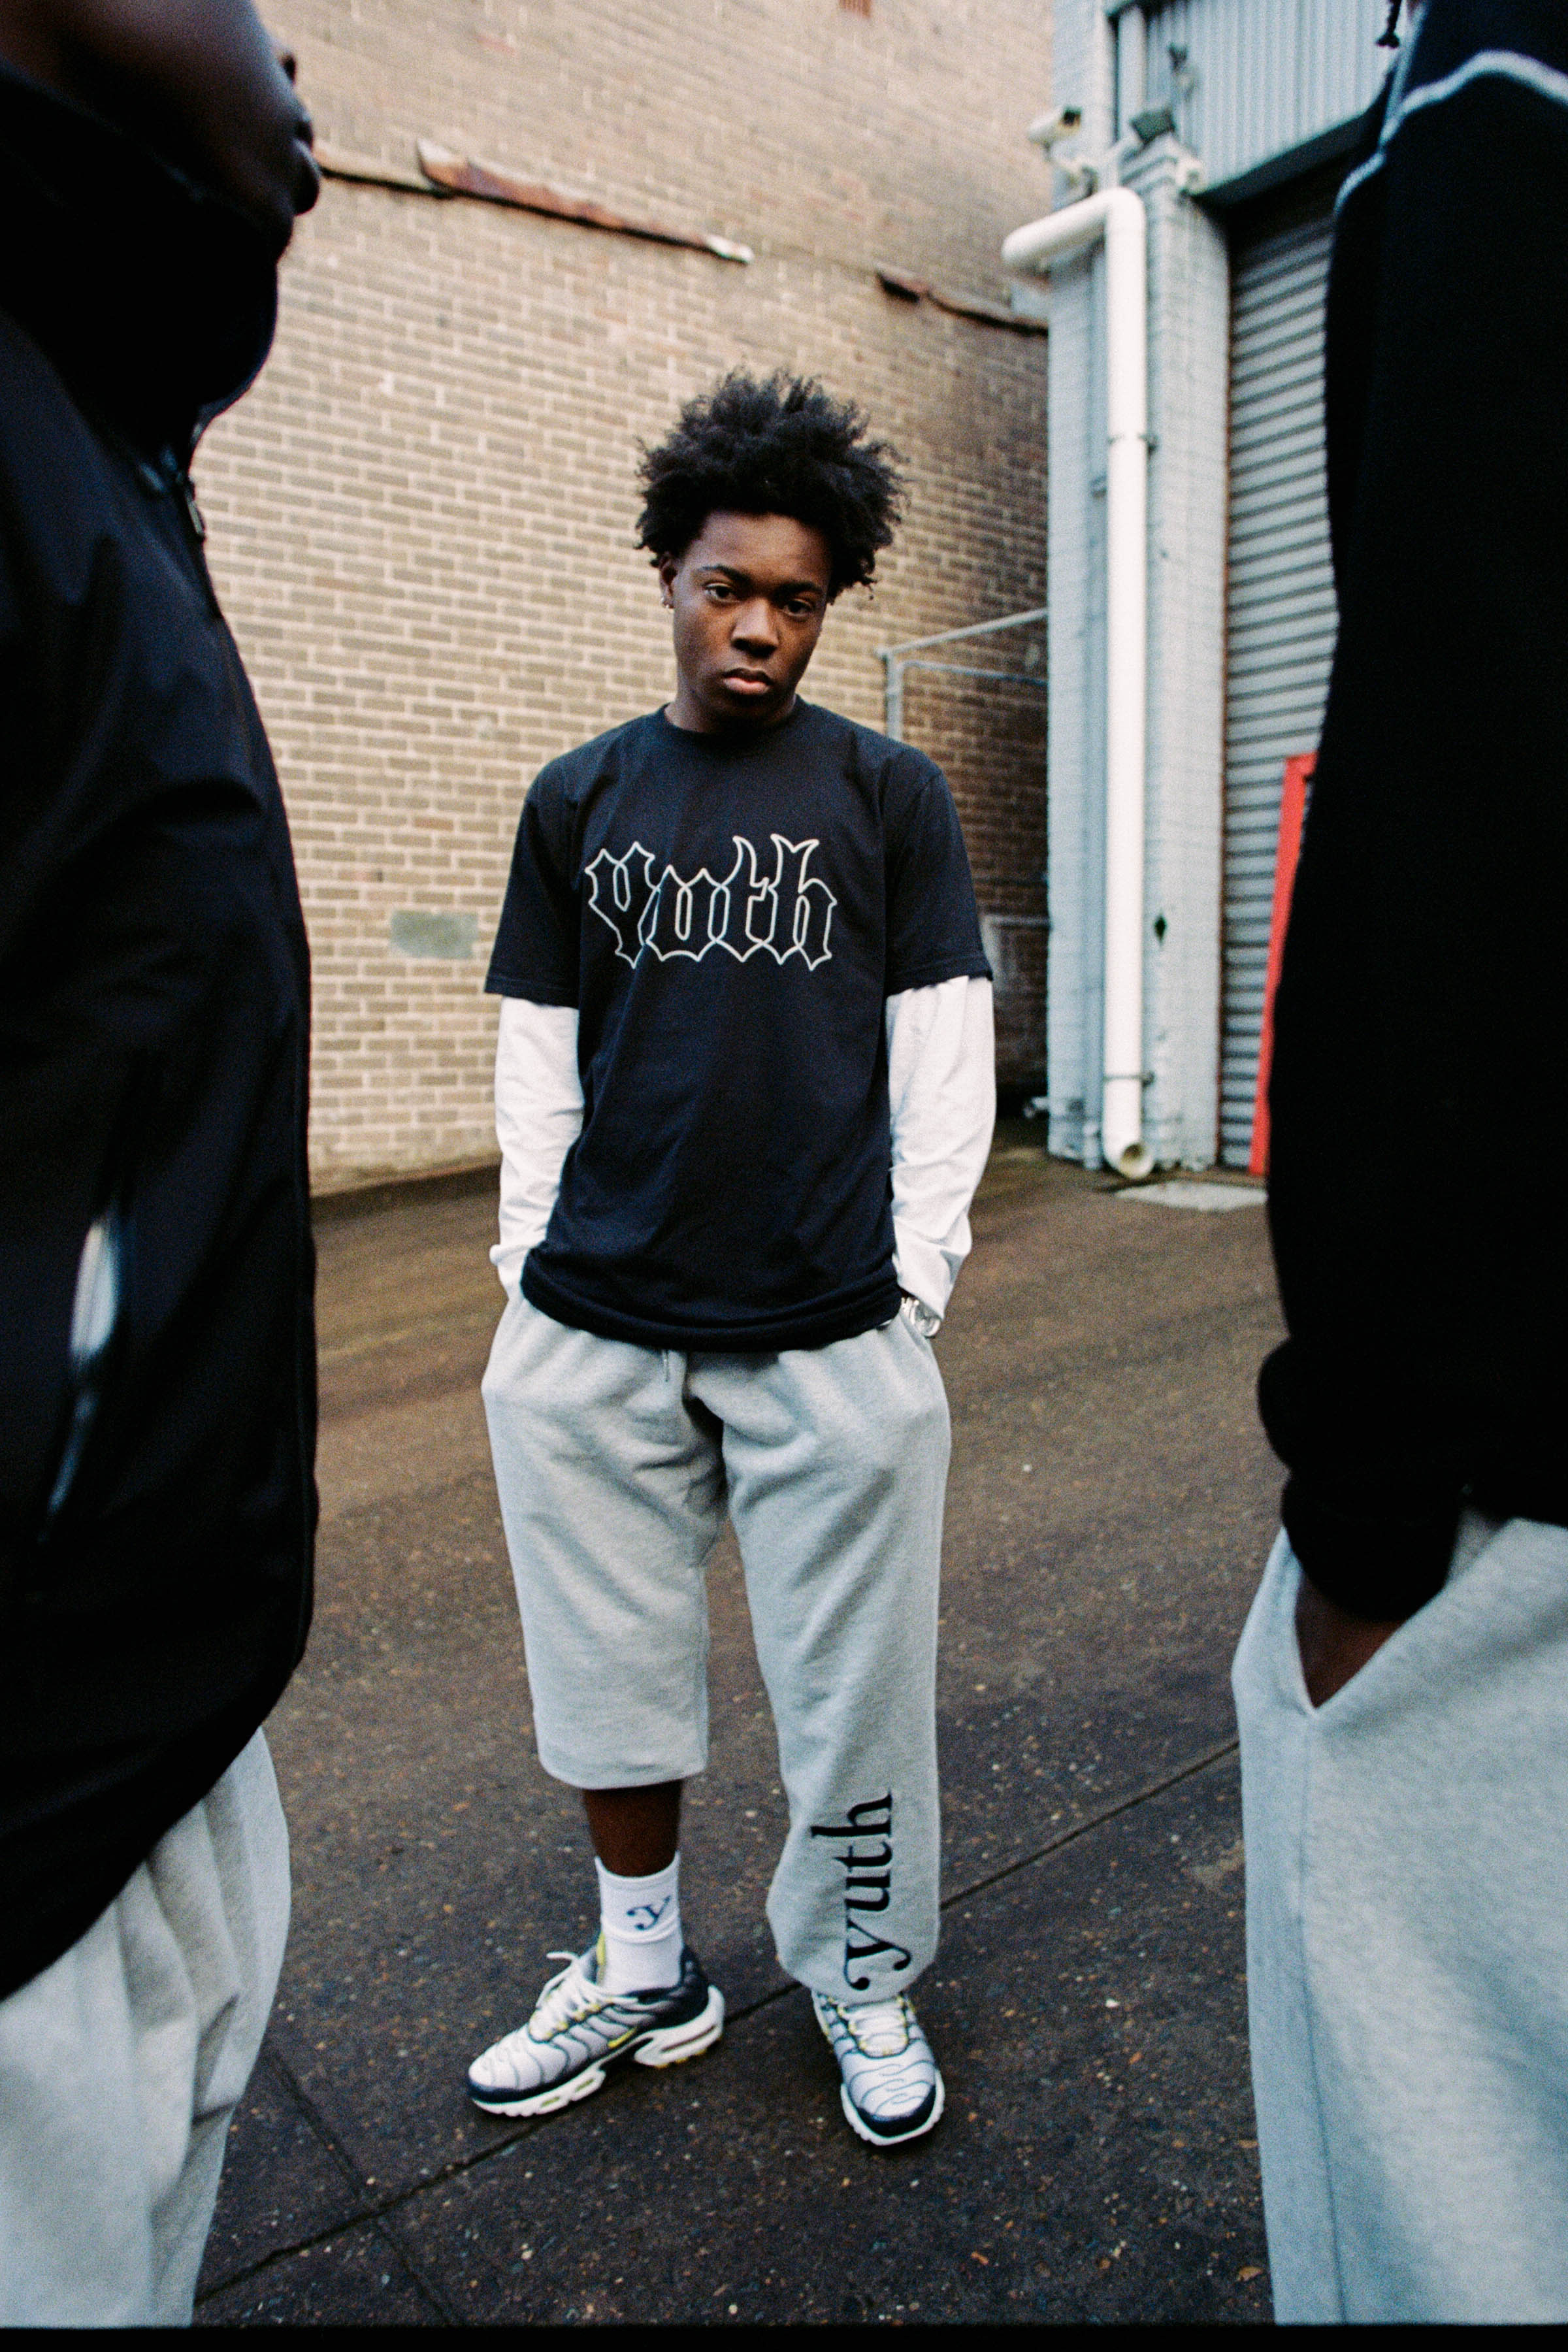 A young man wears a youth t-shirt and track pants